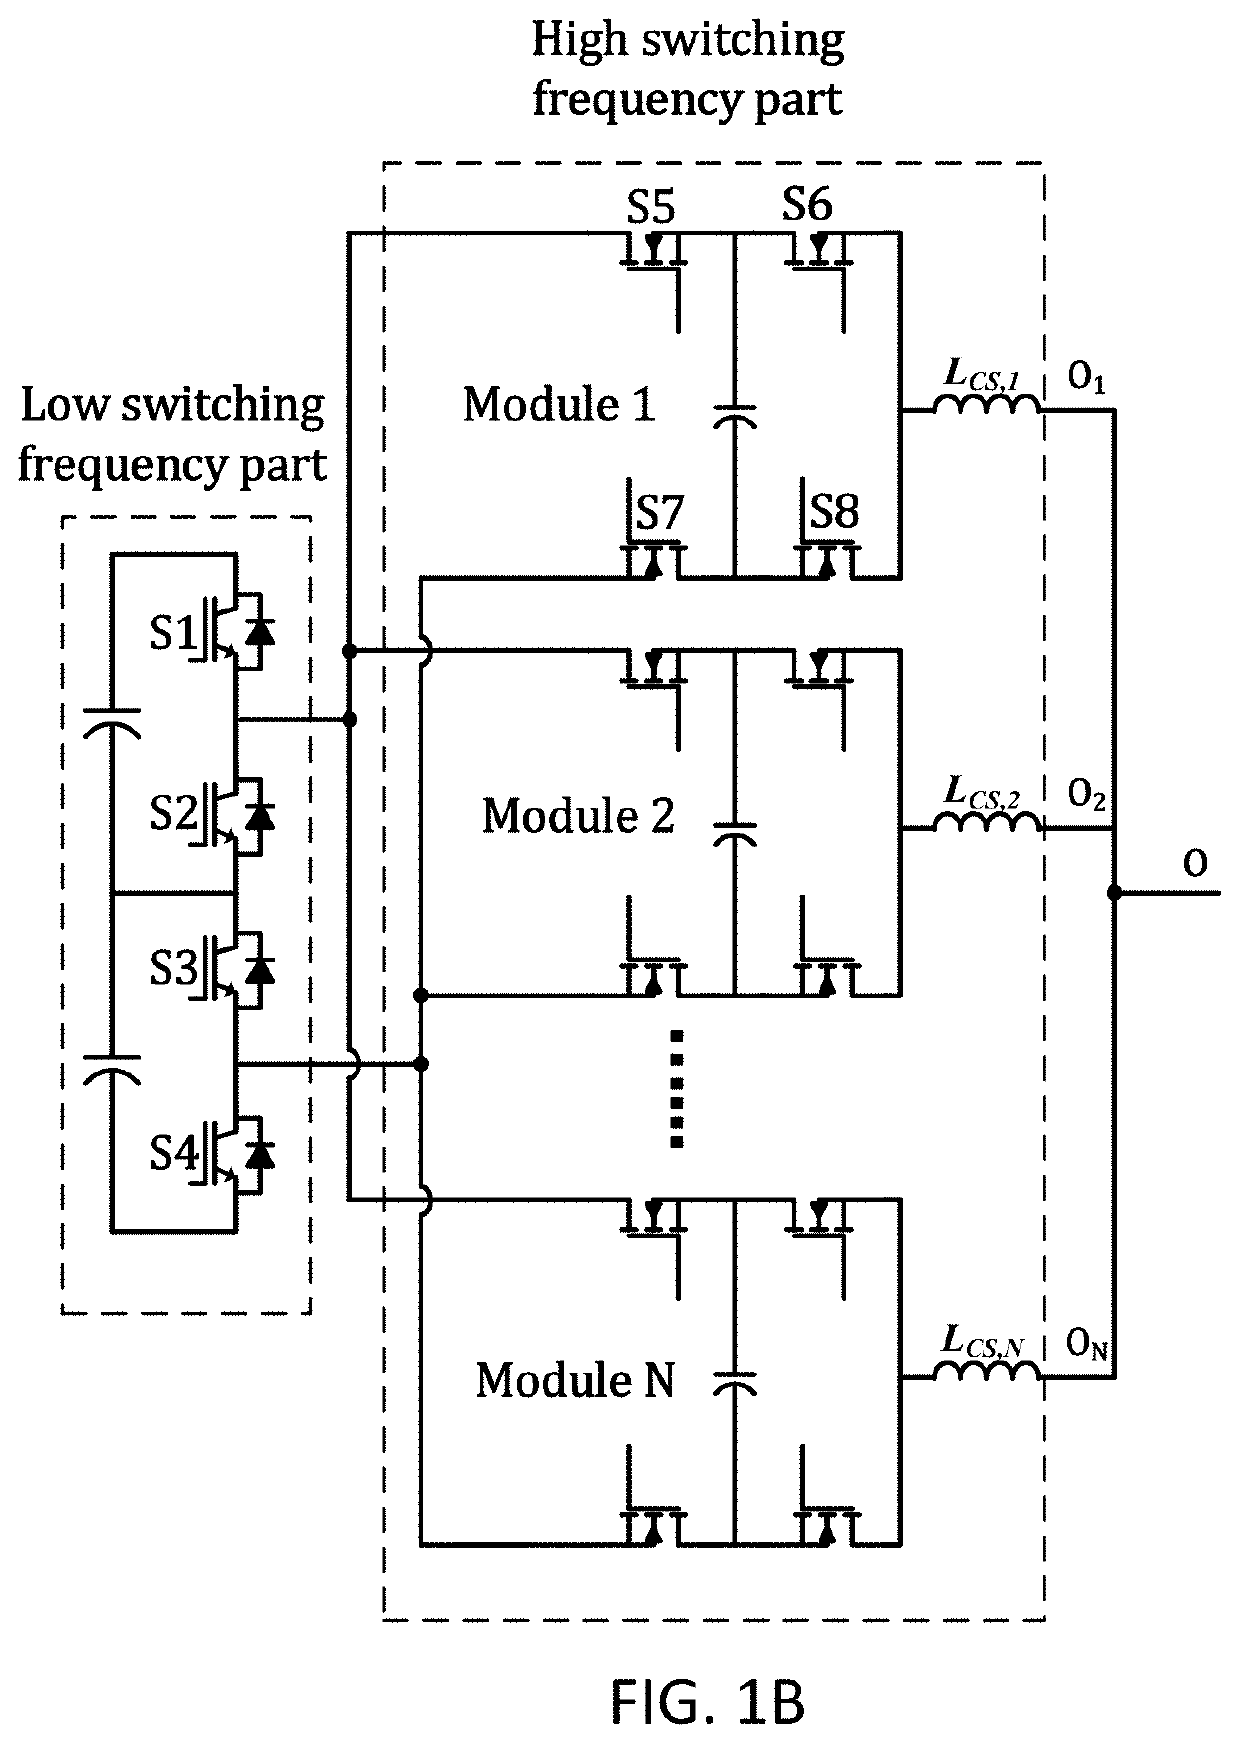 Internal paralleled active neutral point clamped converter with logic-based flying capacitor voltage balancing